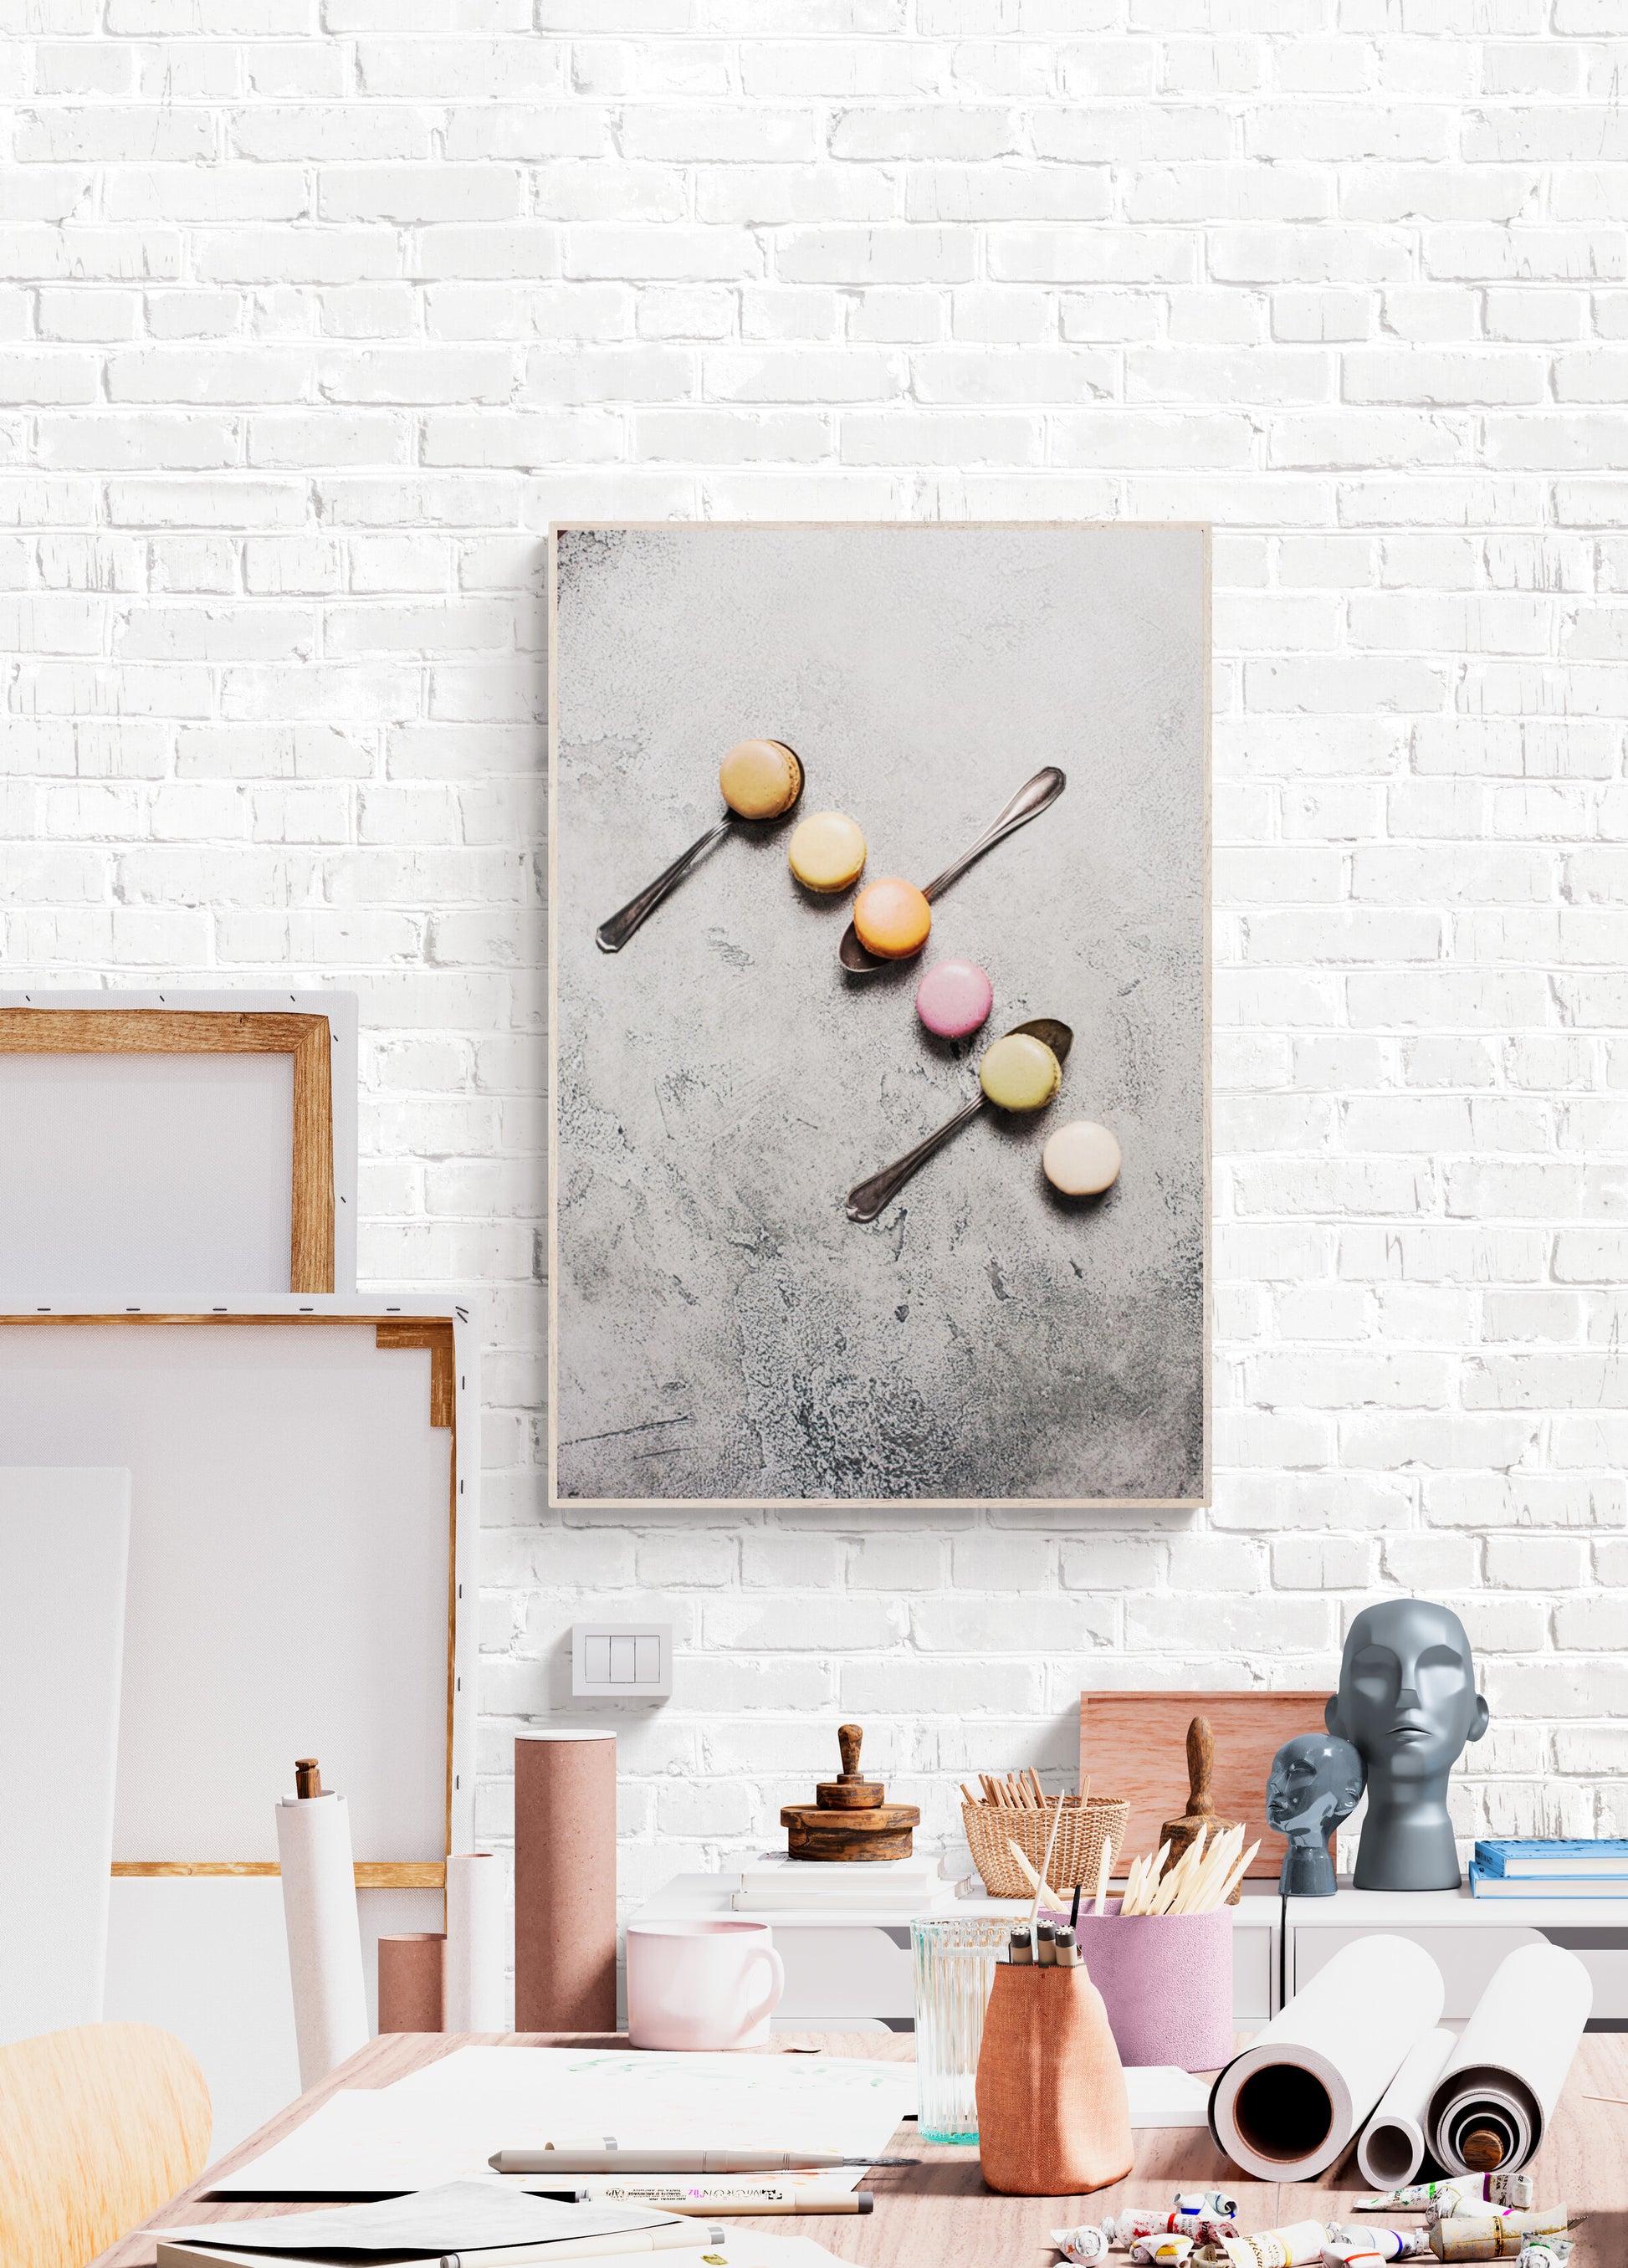 Macarons Photograph as color inspiration in an artists studio